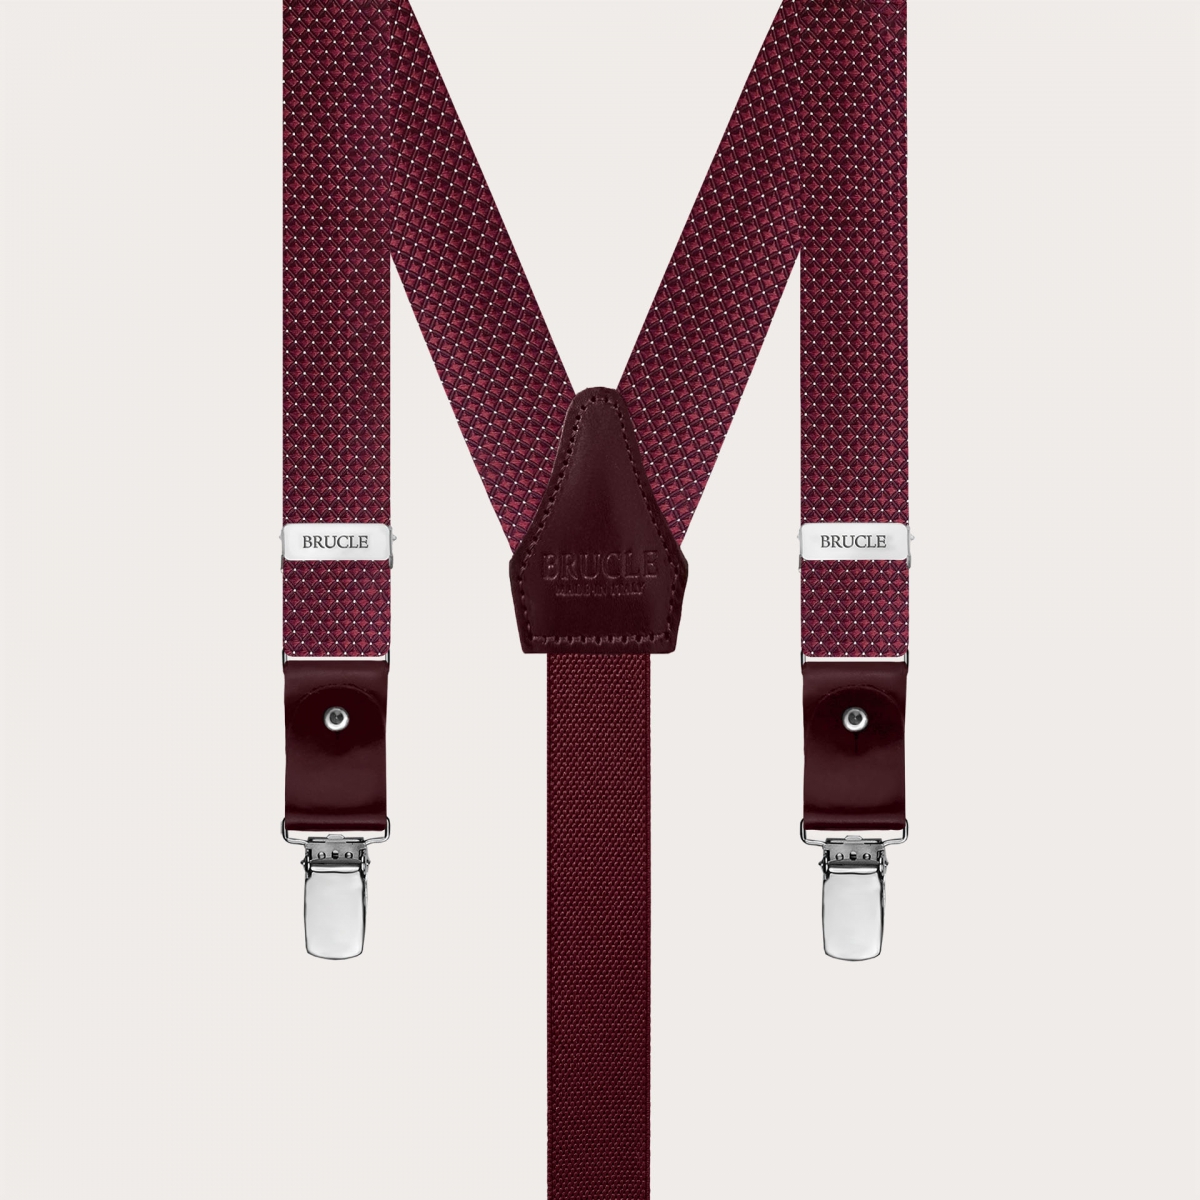 BRUCLE Formal Y-shape fabric suspenders in silk, dotted bordeaux pattern